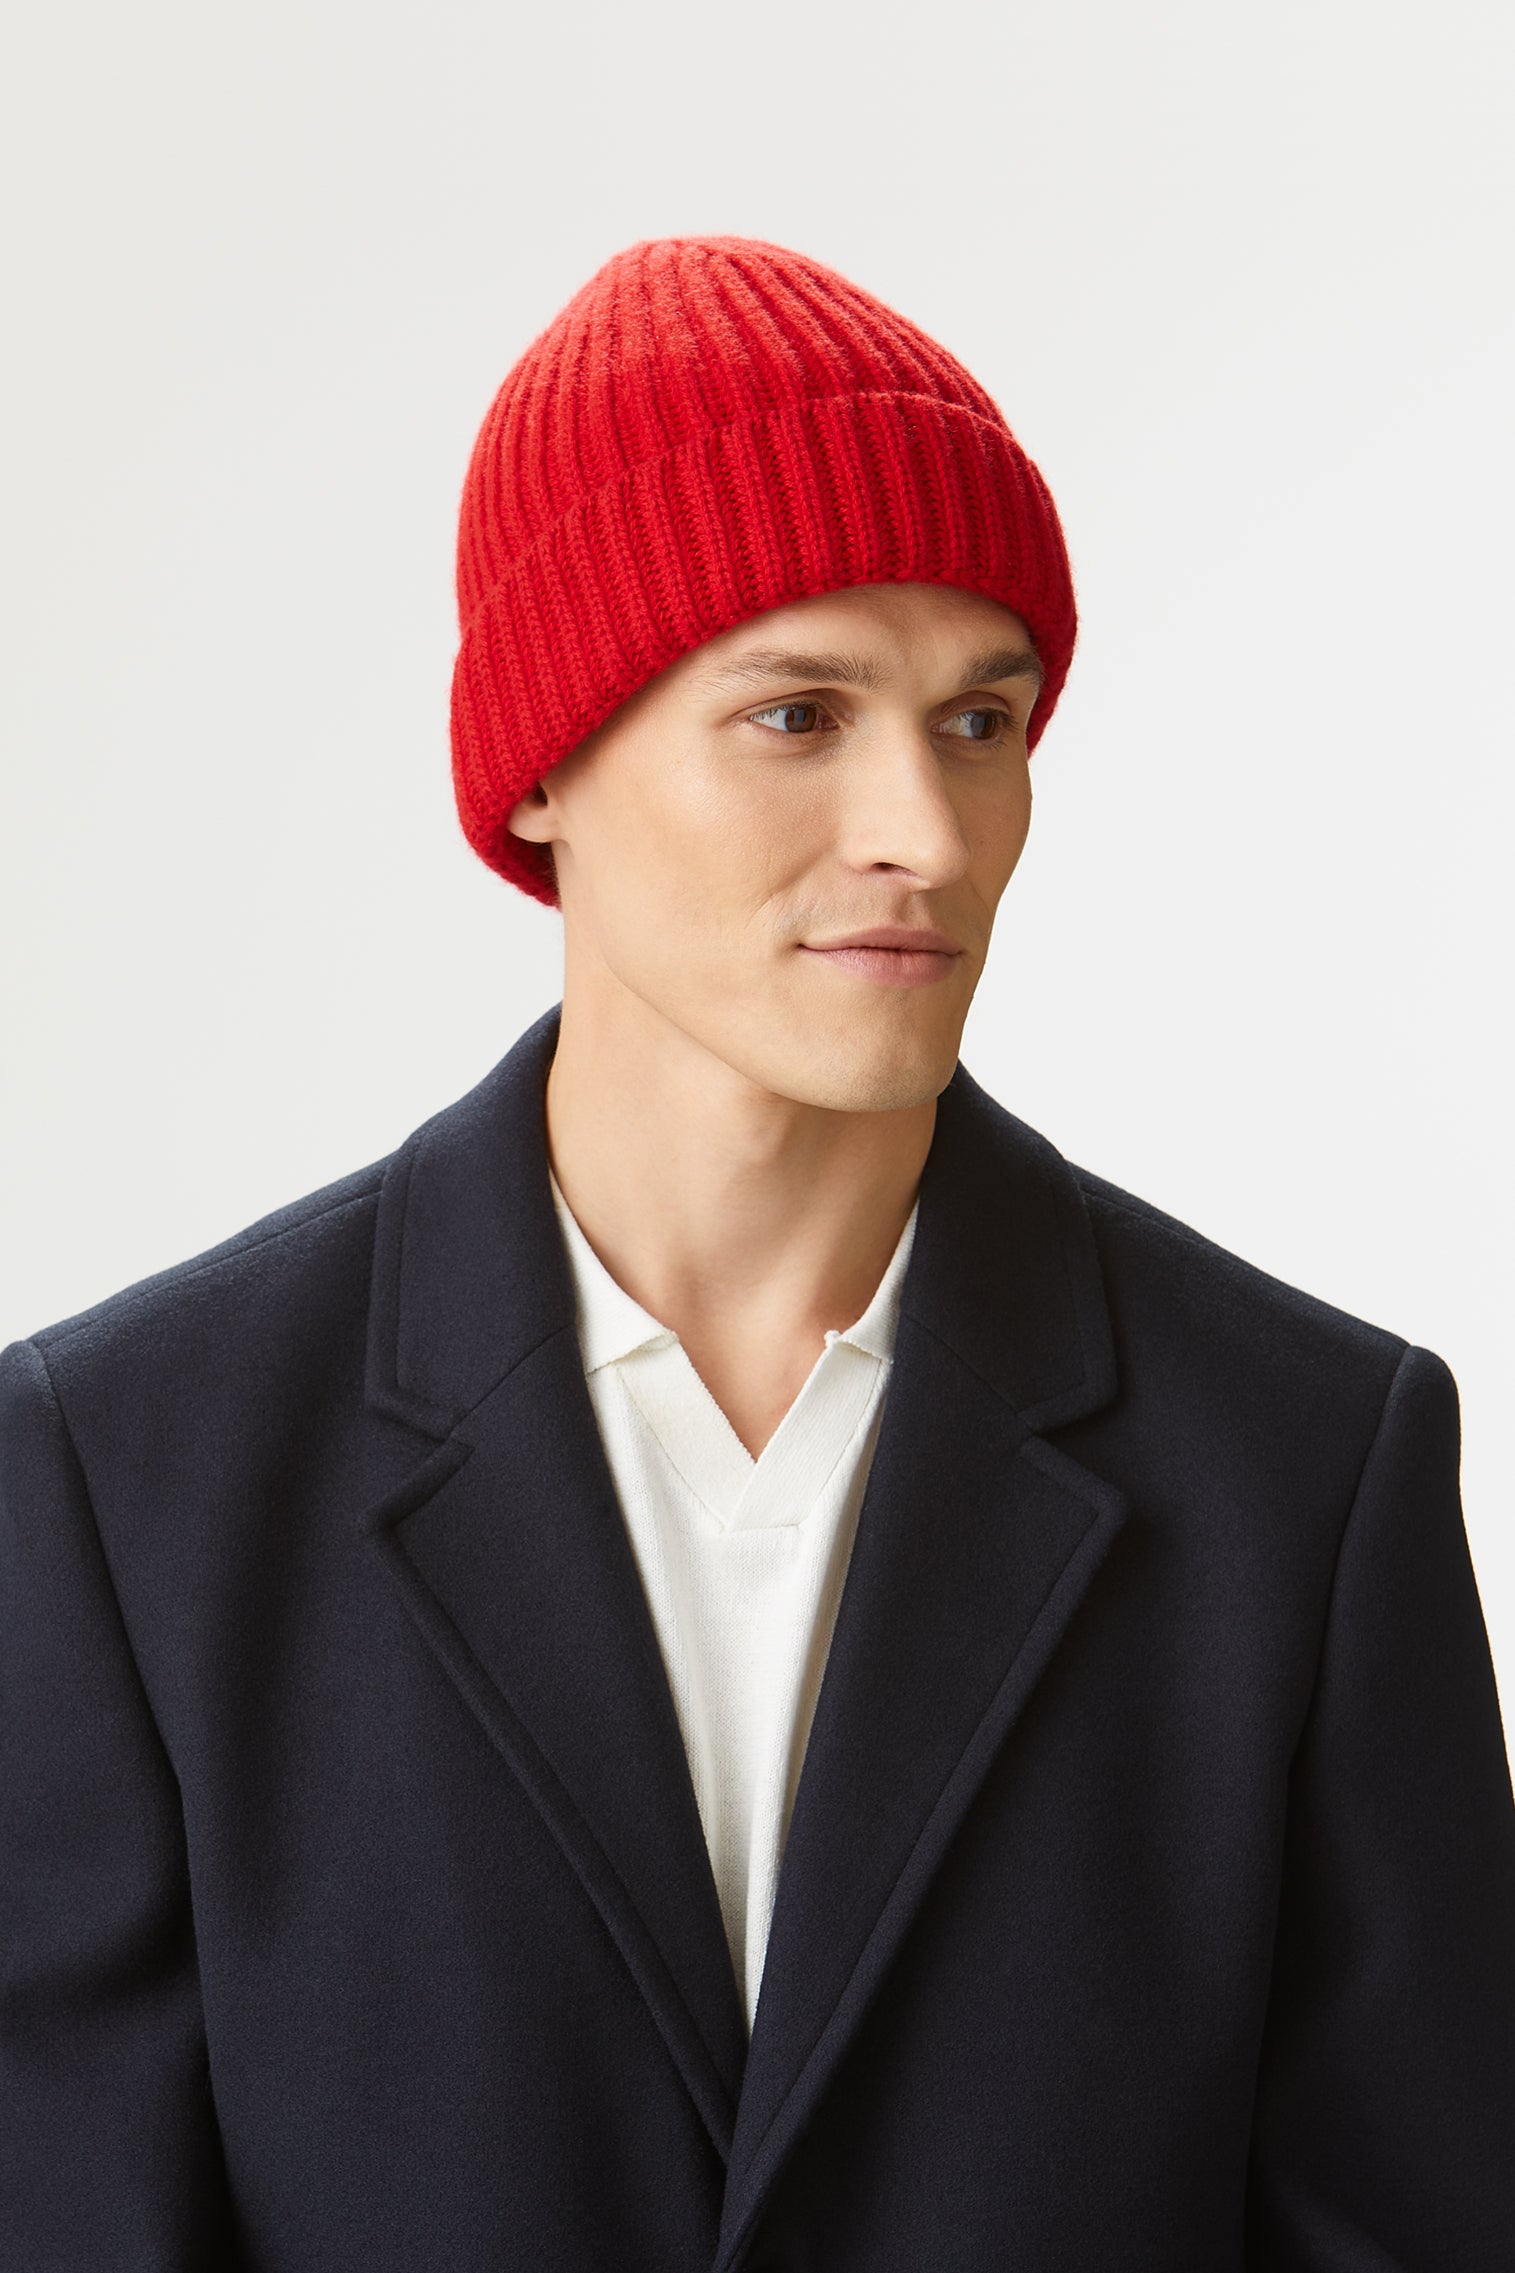 Rannoch Red Cashmere Beanie - Hats for Round Face Shapes - Lock & Co. Hatters London UK